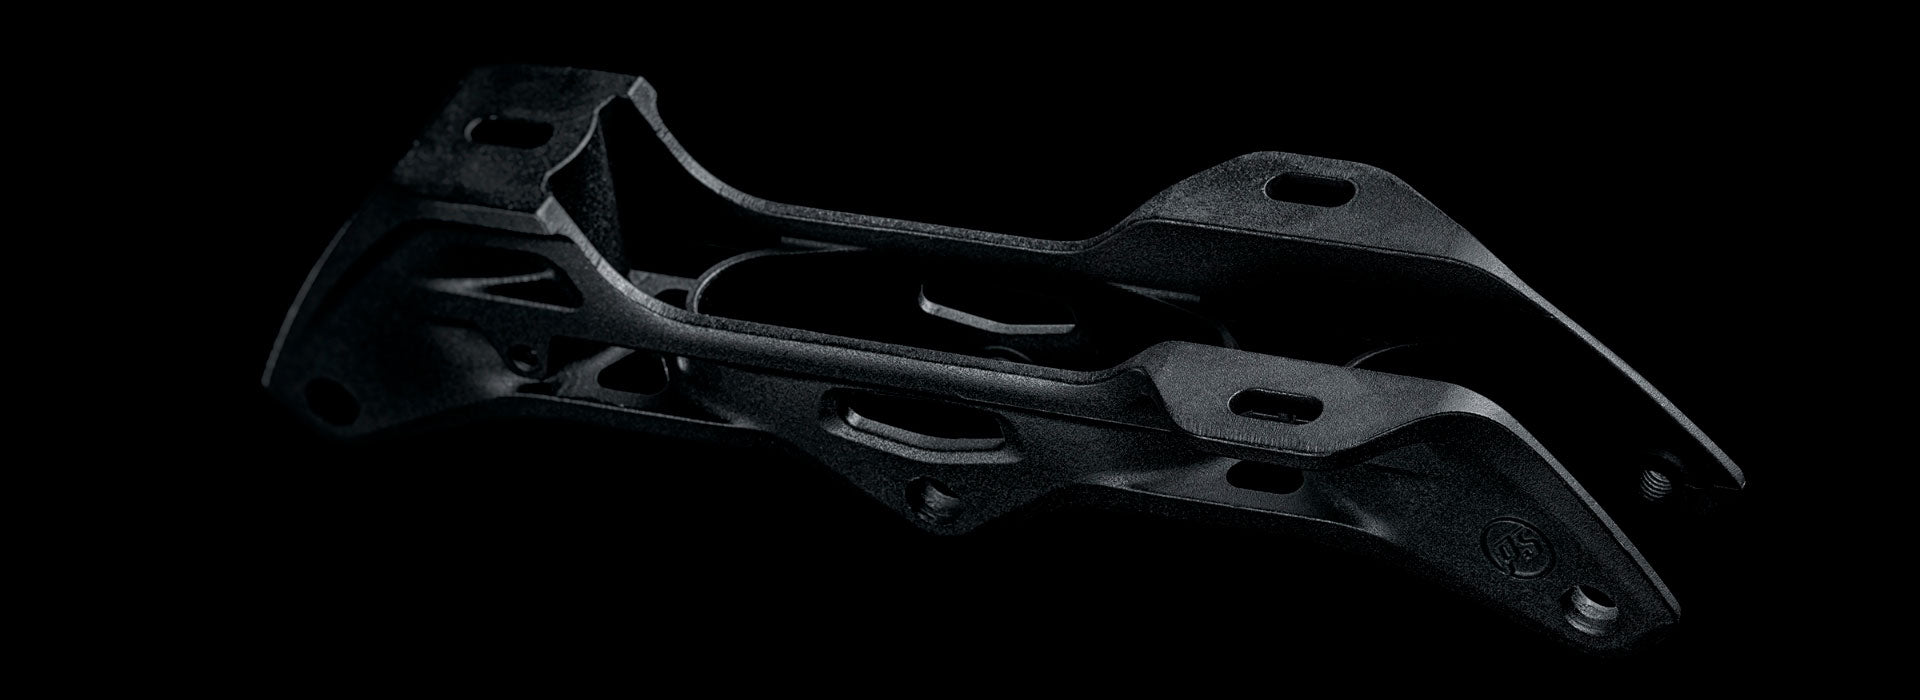 A close-up image of a Powerslide Elite inline skate frame without wheels